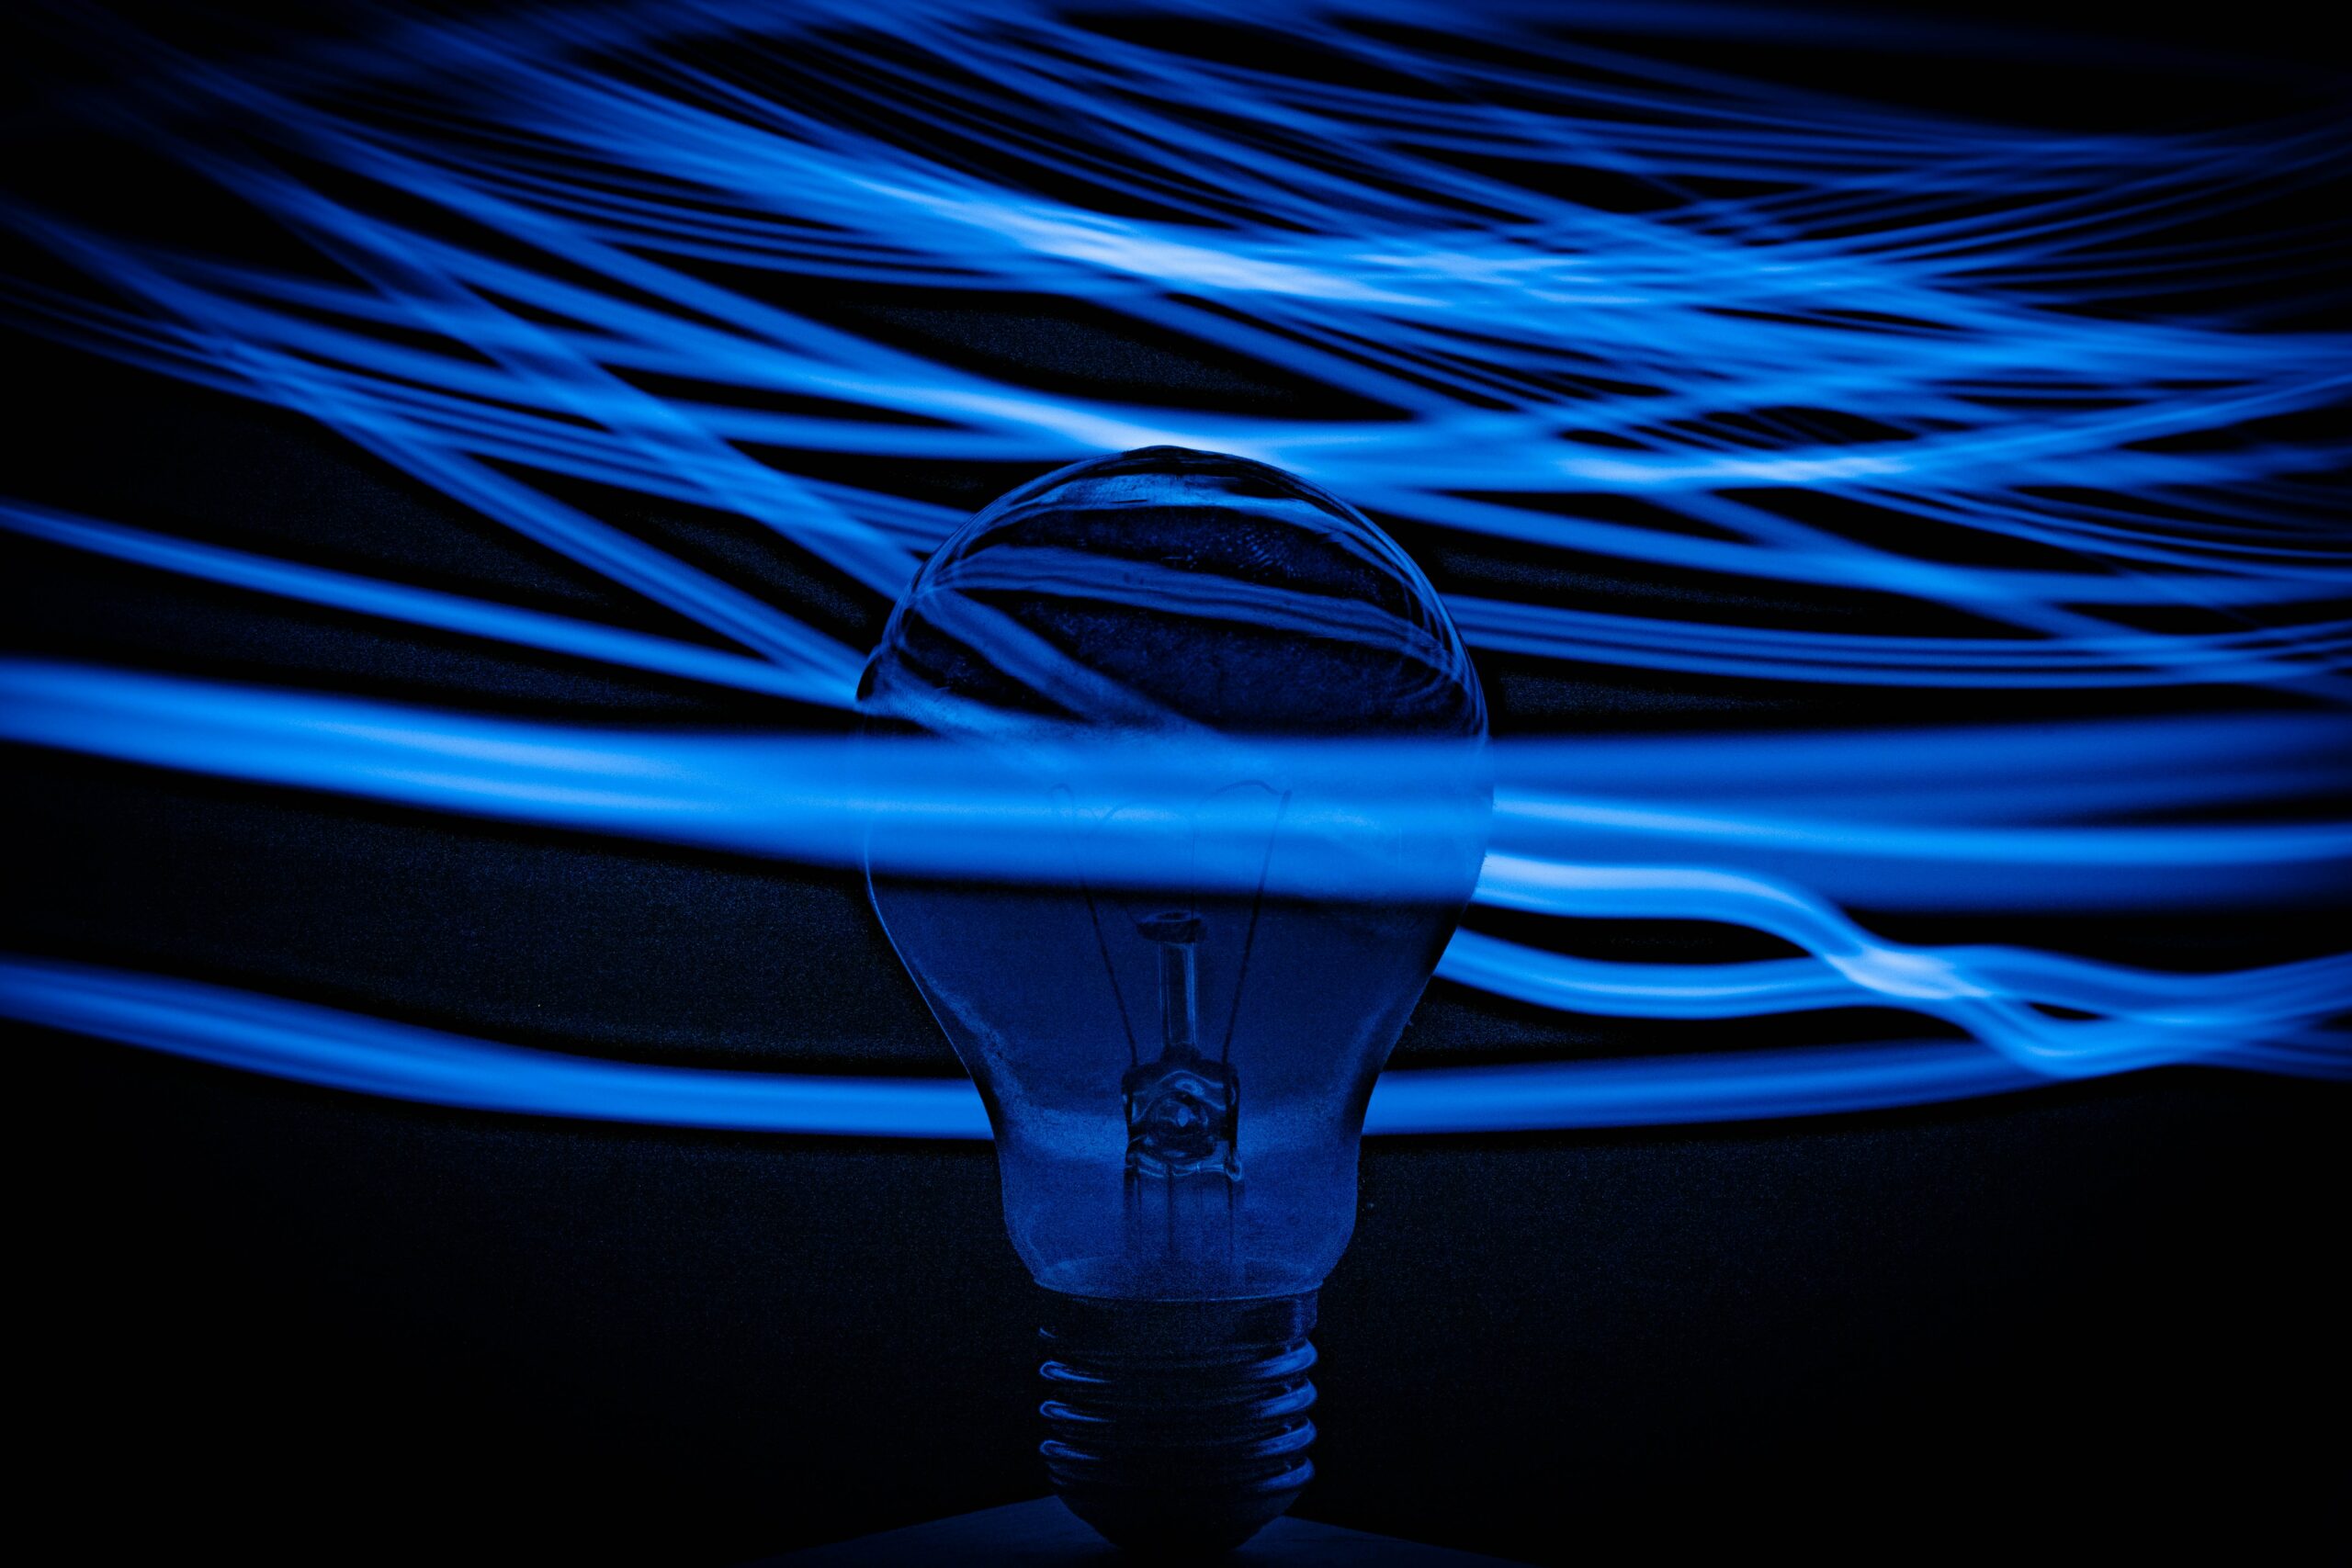 Image of a light bulb in the middle of a cascade of electric waves by Nejc Soklič (via Unsplash)